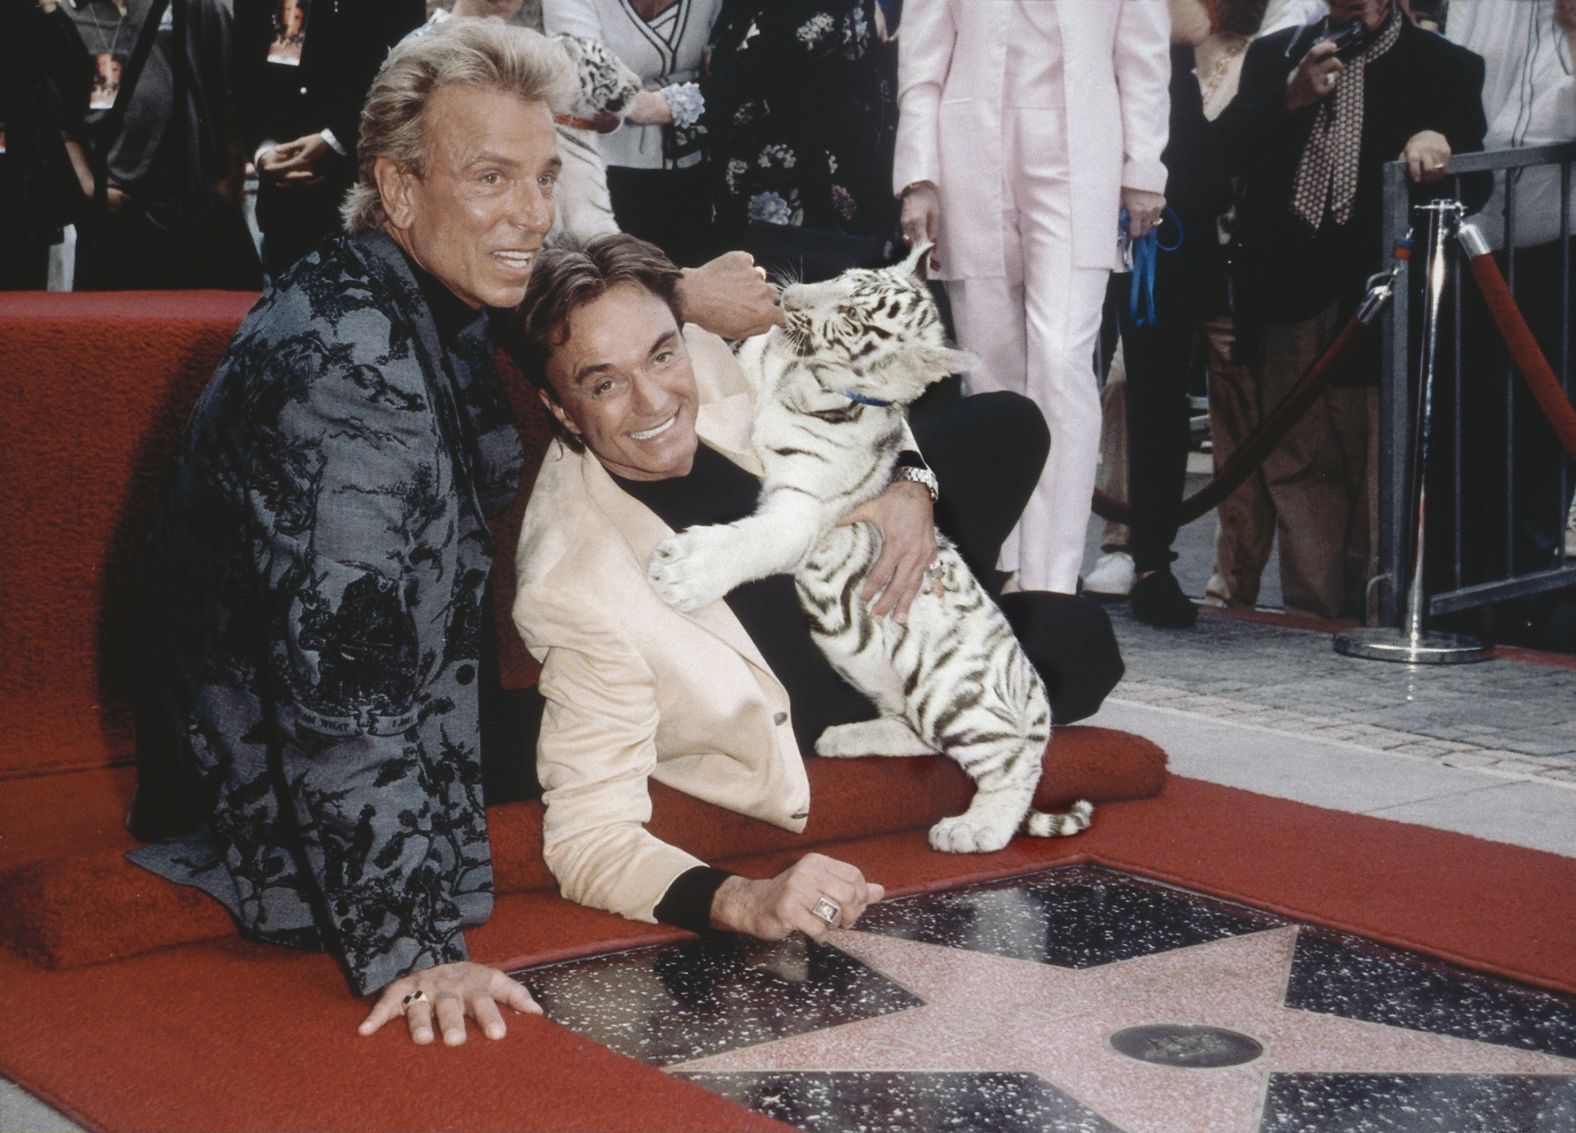 Siegfried & Roy are honored with a star on the Hollywood Walk of Fame in 1999.